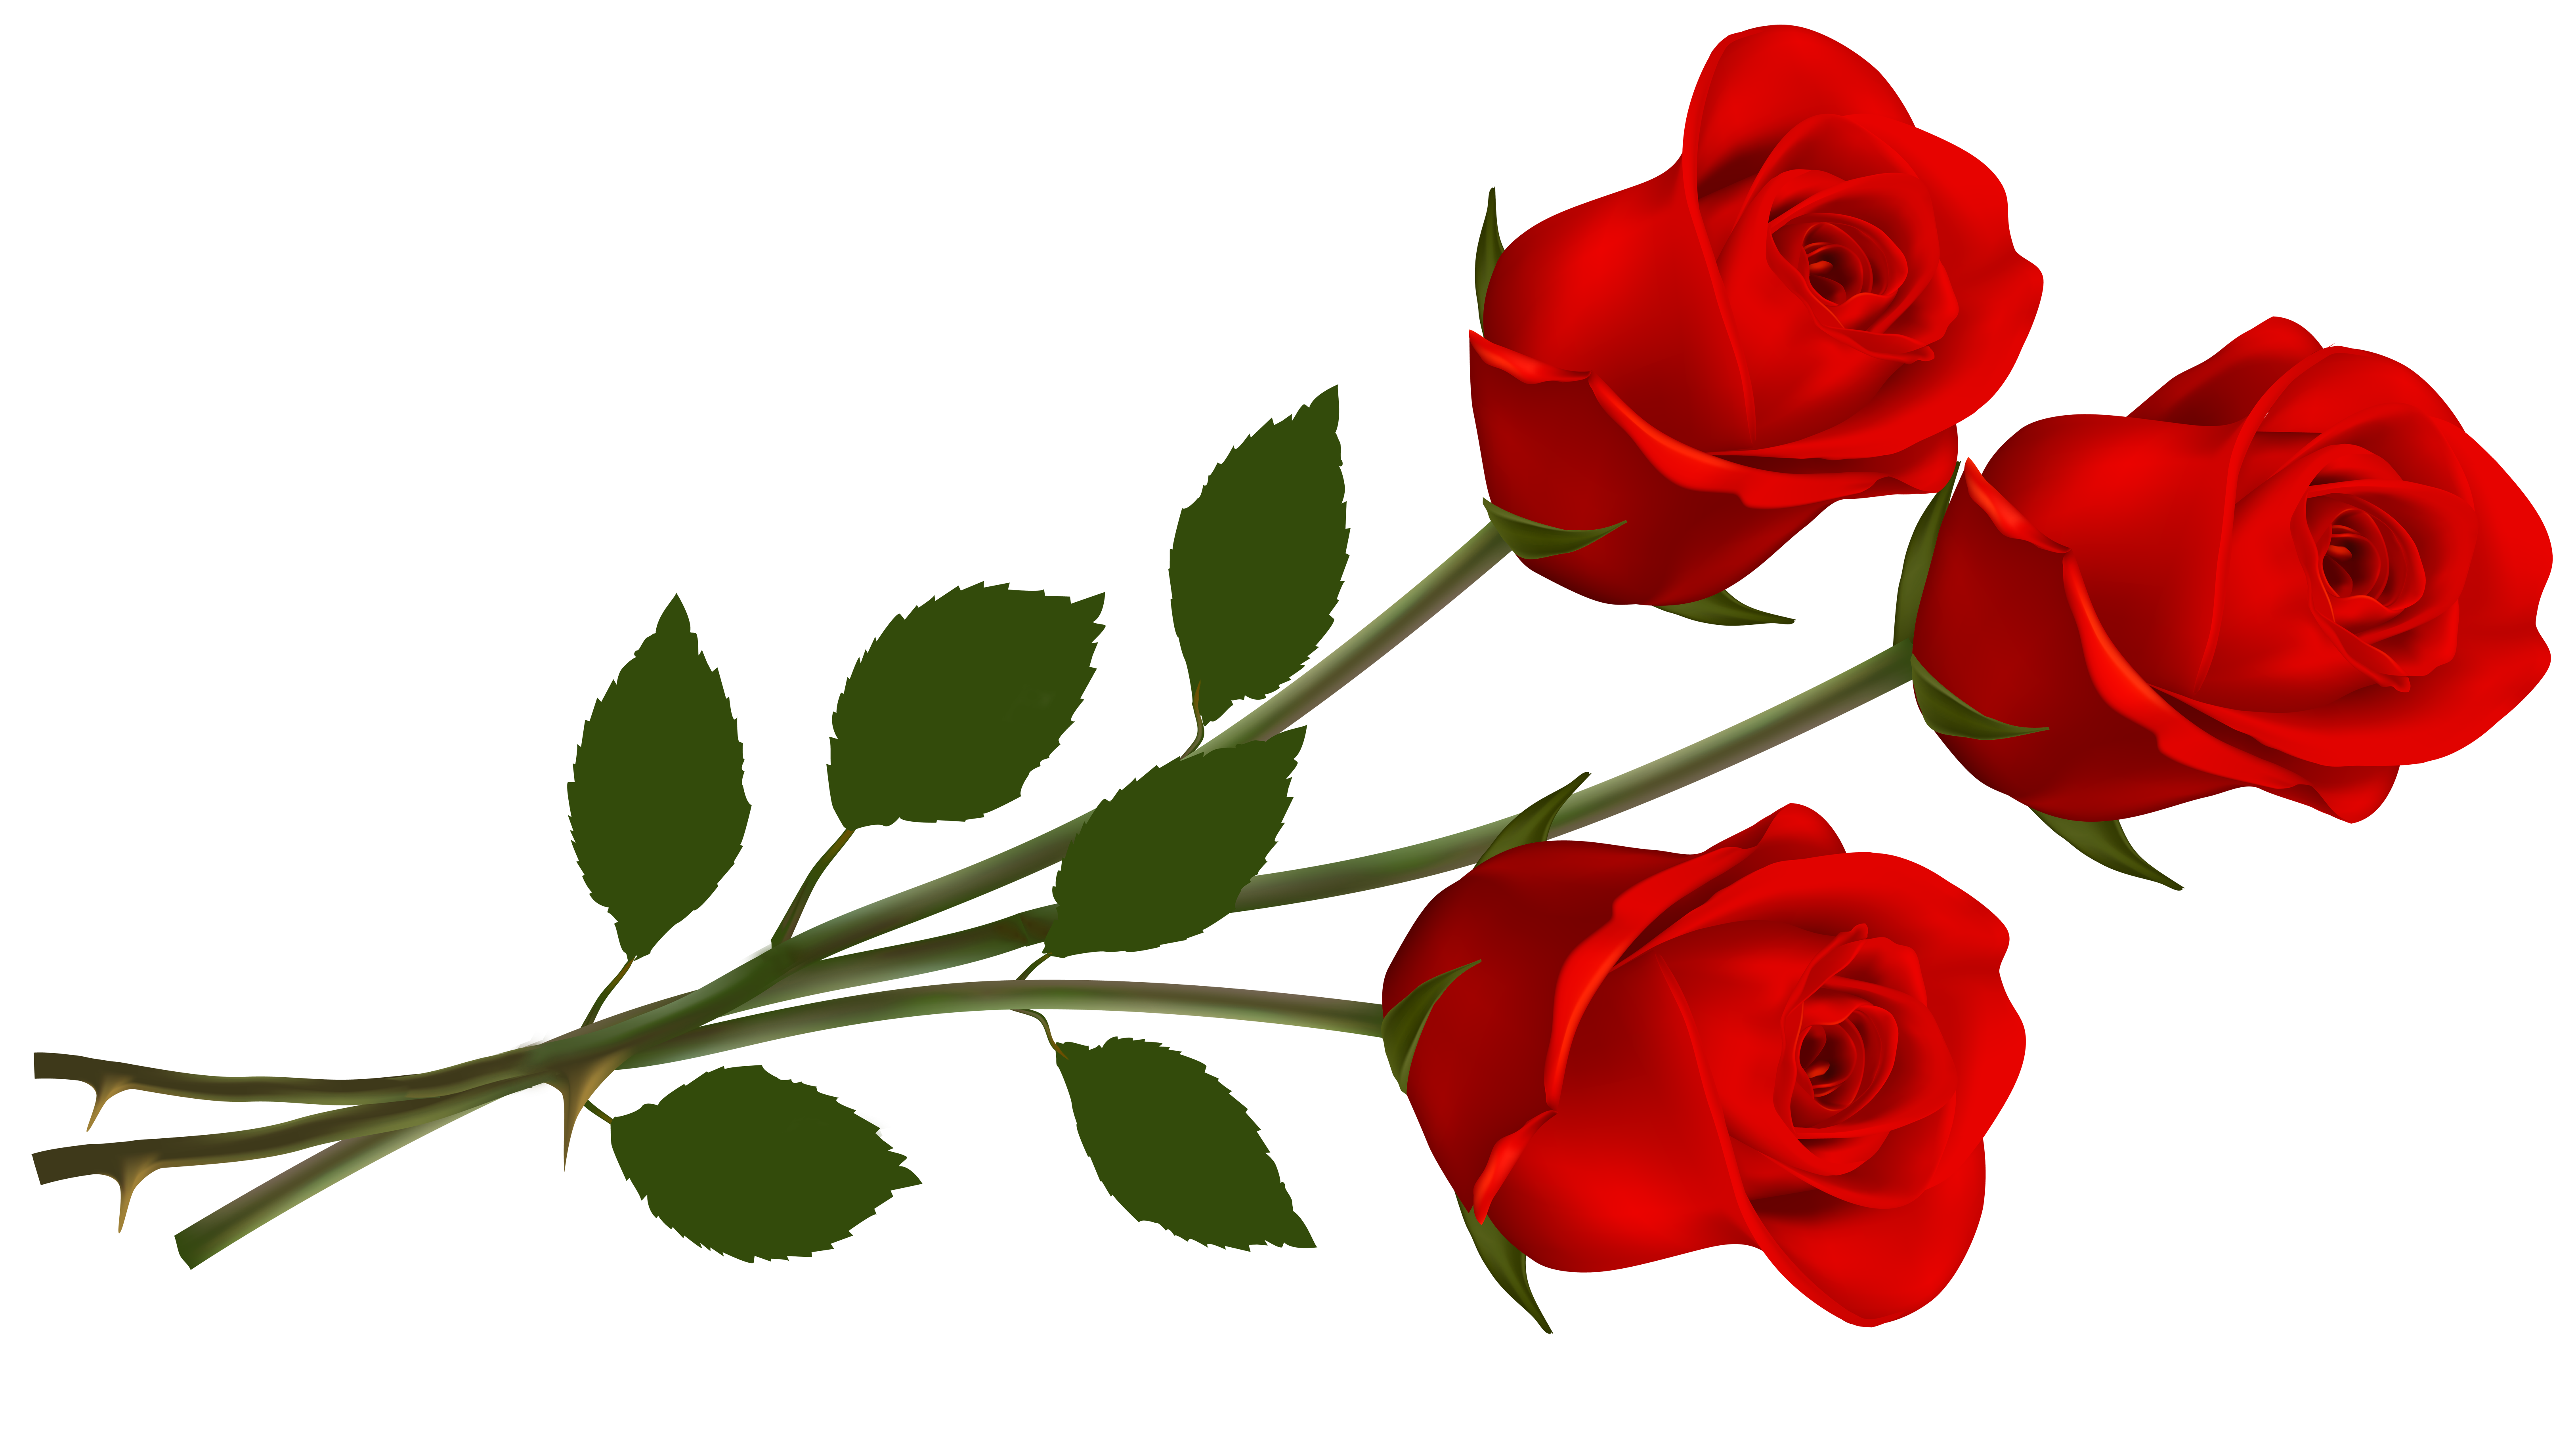 Large Red Roses PNG Clipart